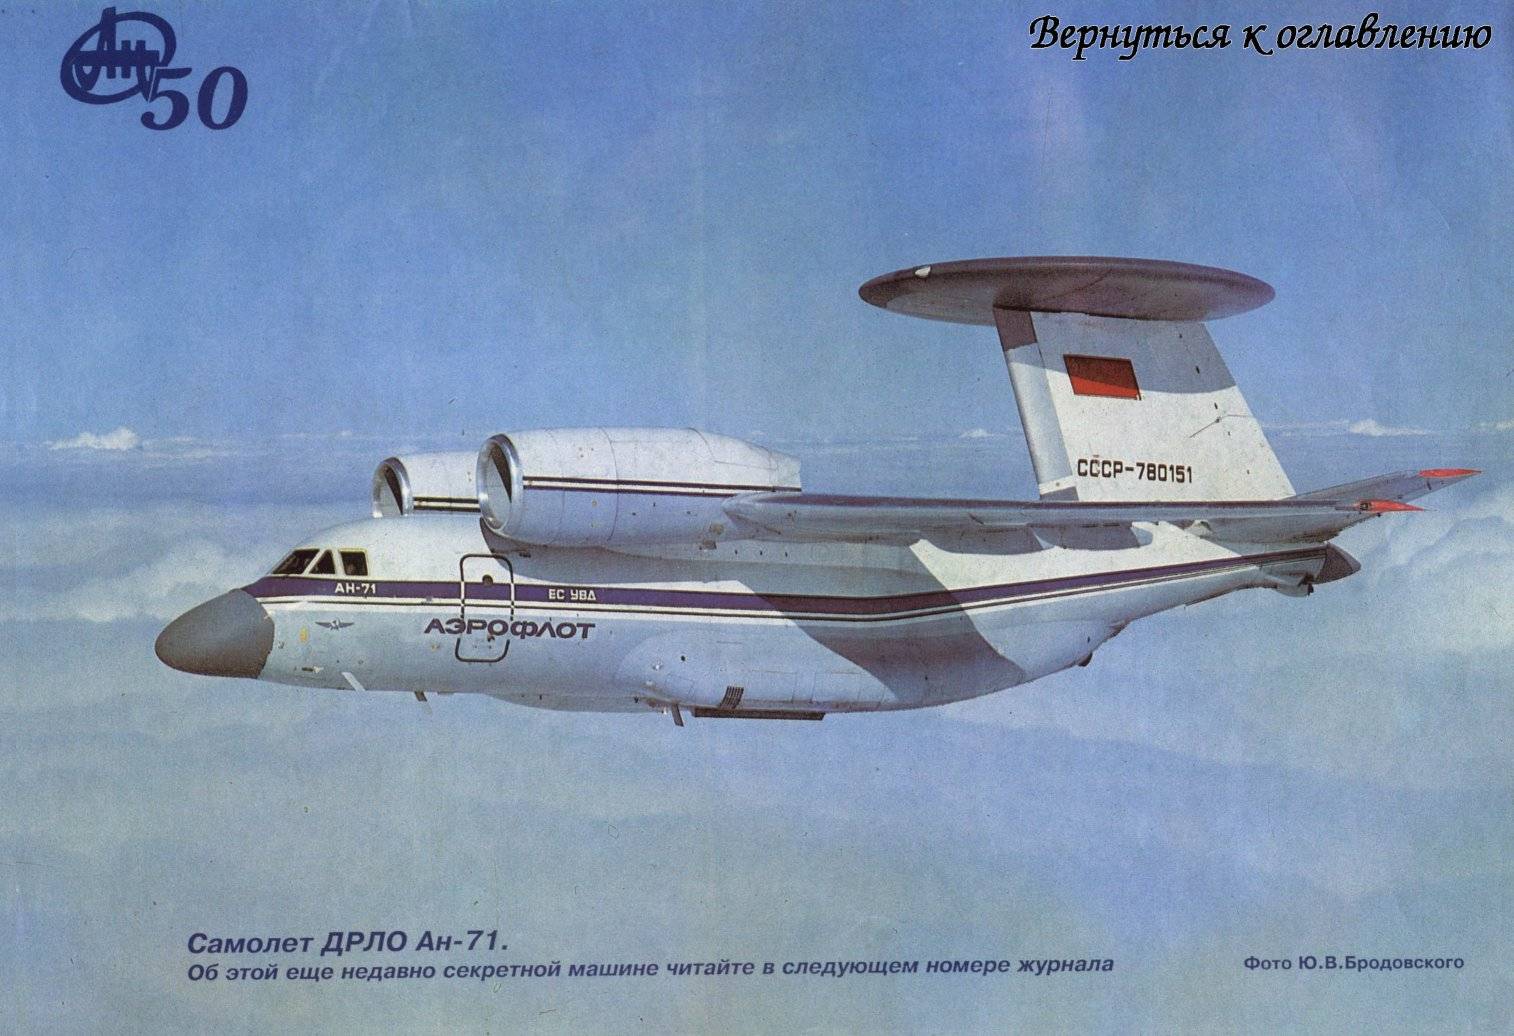 The first public photo of an-71 in the Soviet civil aviation album